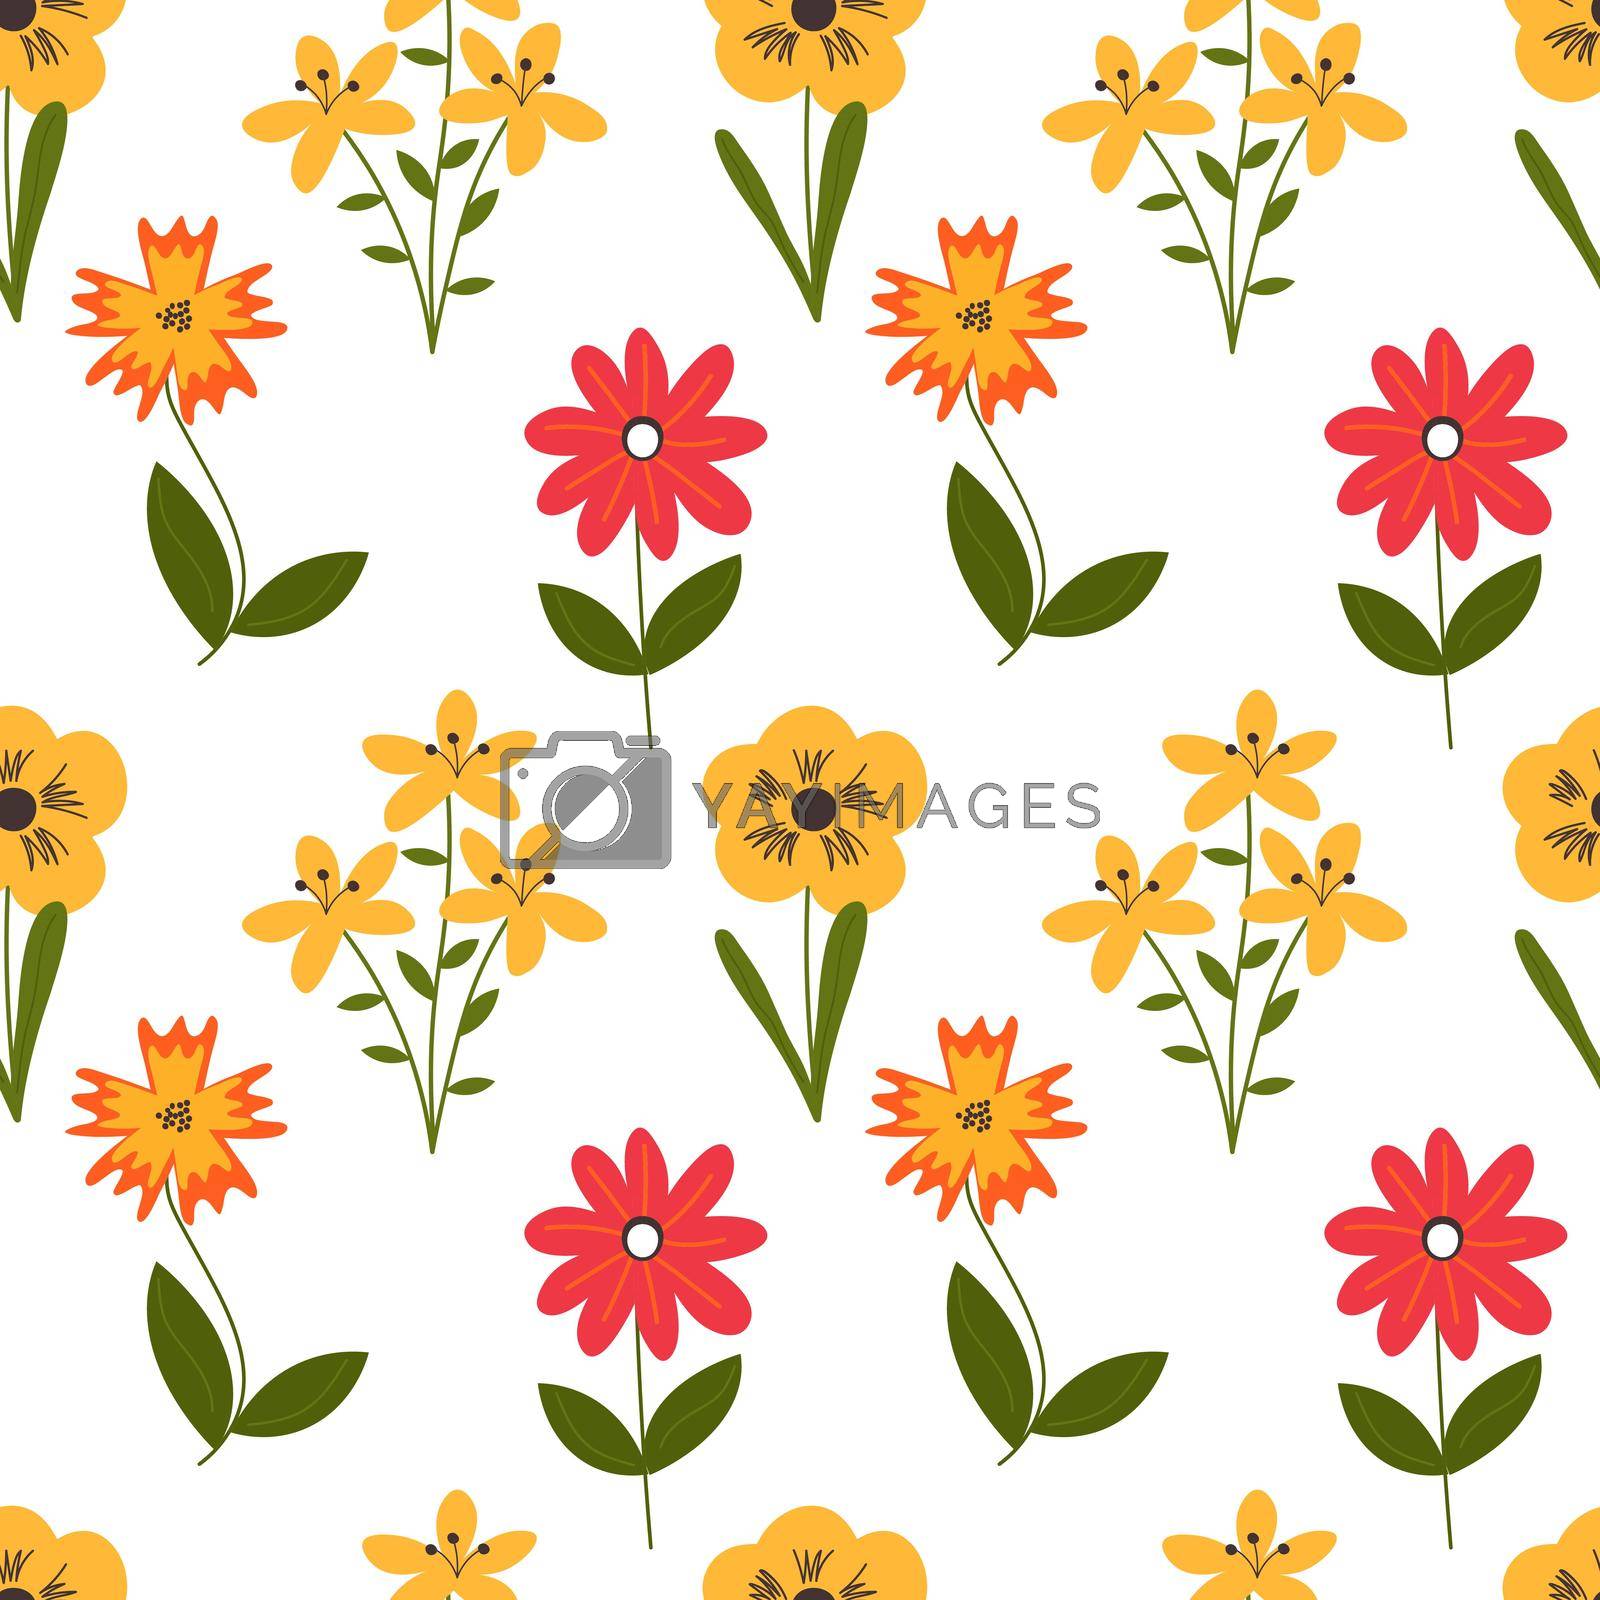 Royalty free image of Seamless cute floral vector pattern background. Flower pattern on white background EPS by Alxyzt